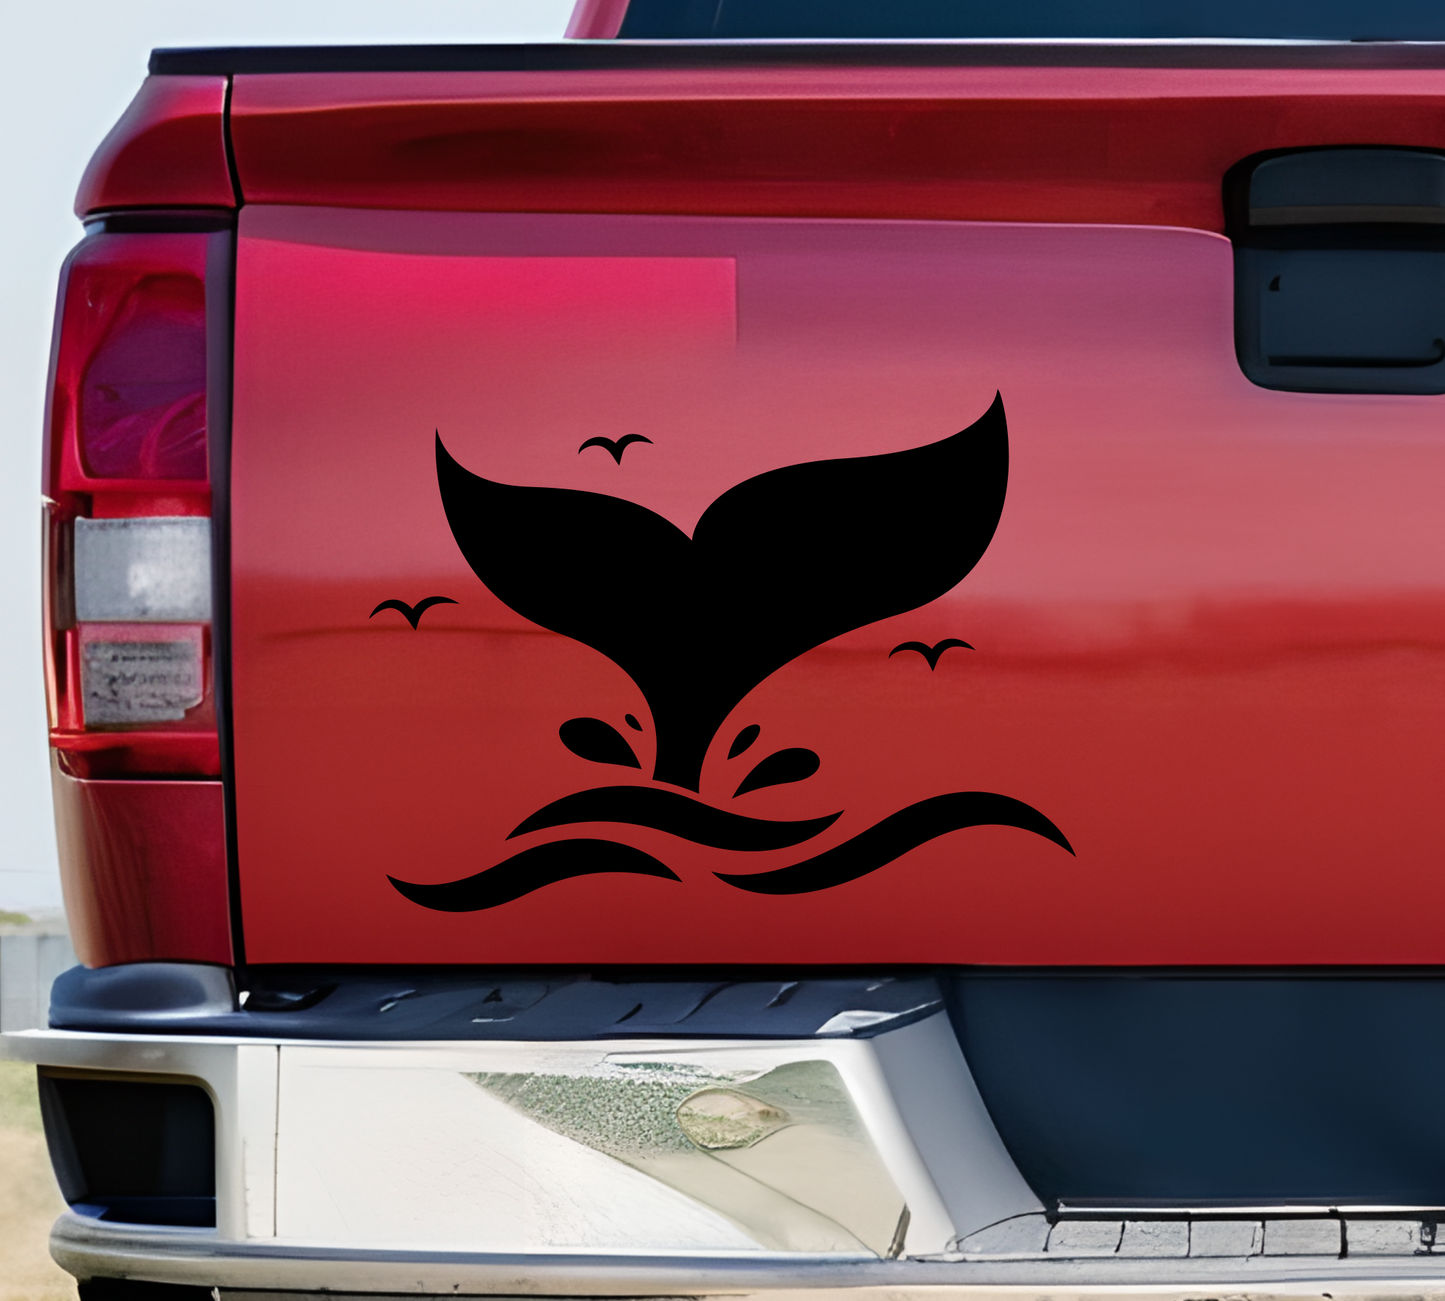 Whale Tail Vinyl Decal Sticker | Splashing Whale Tail Decal